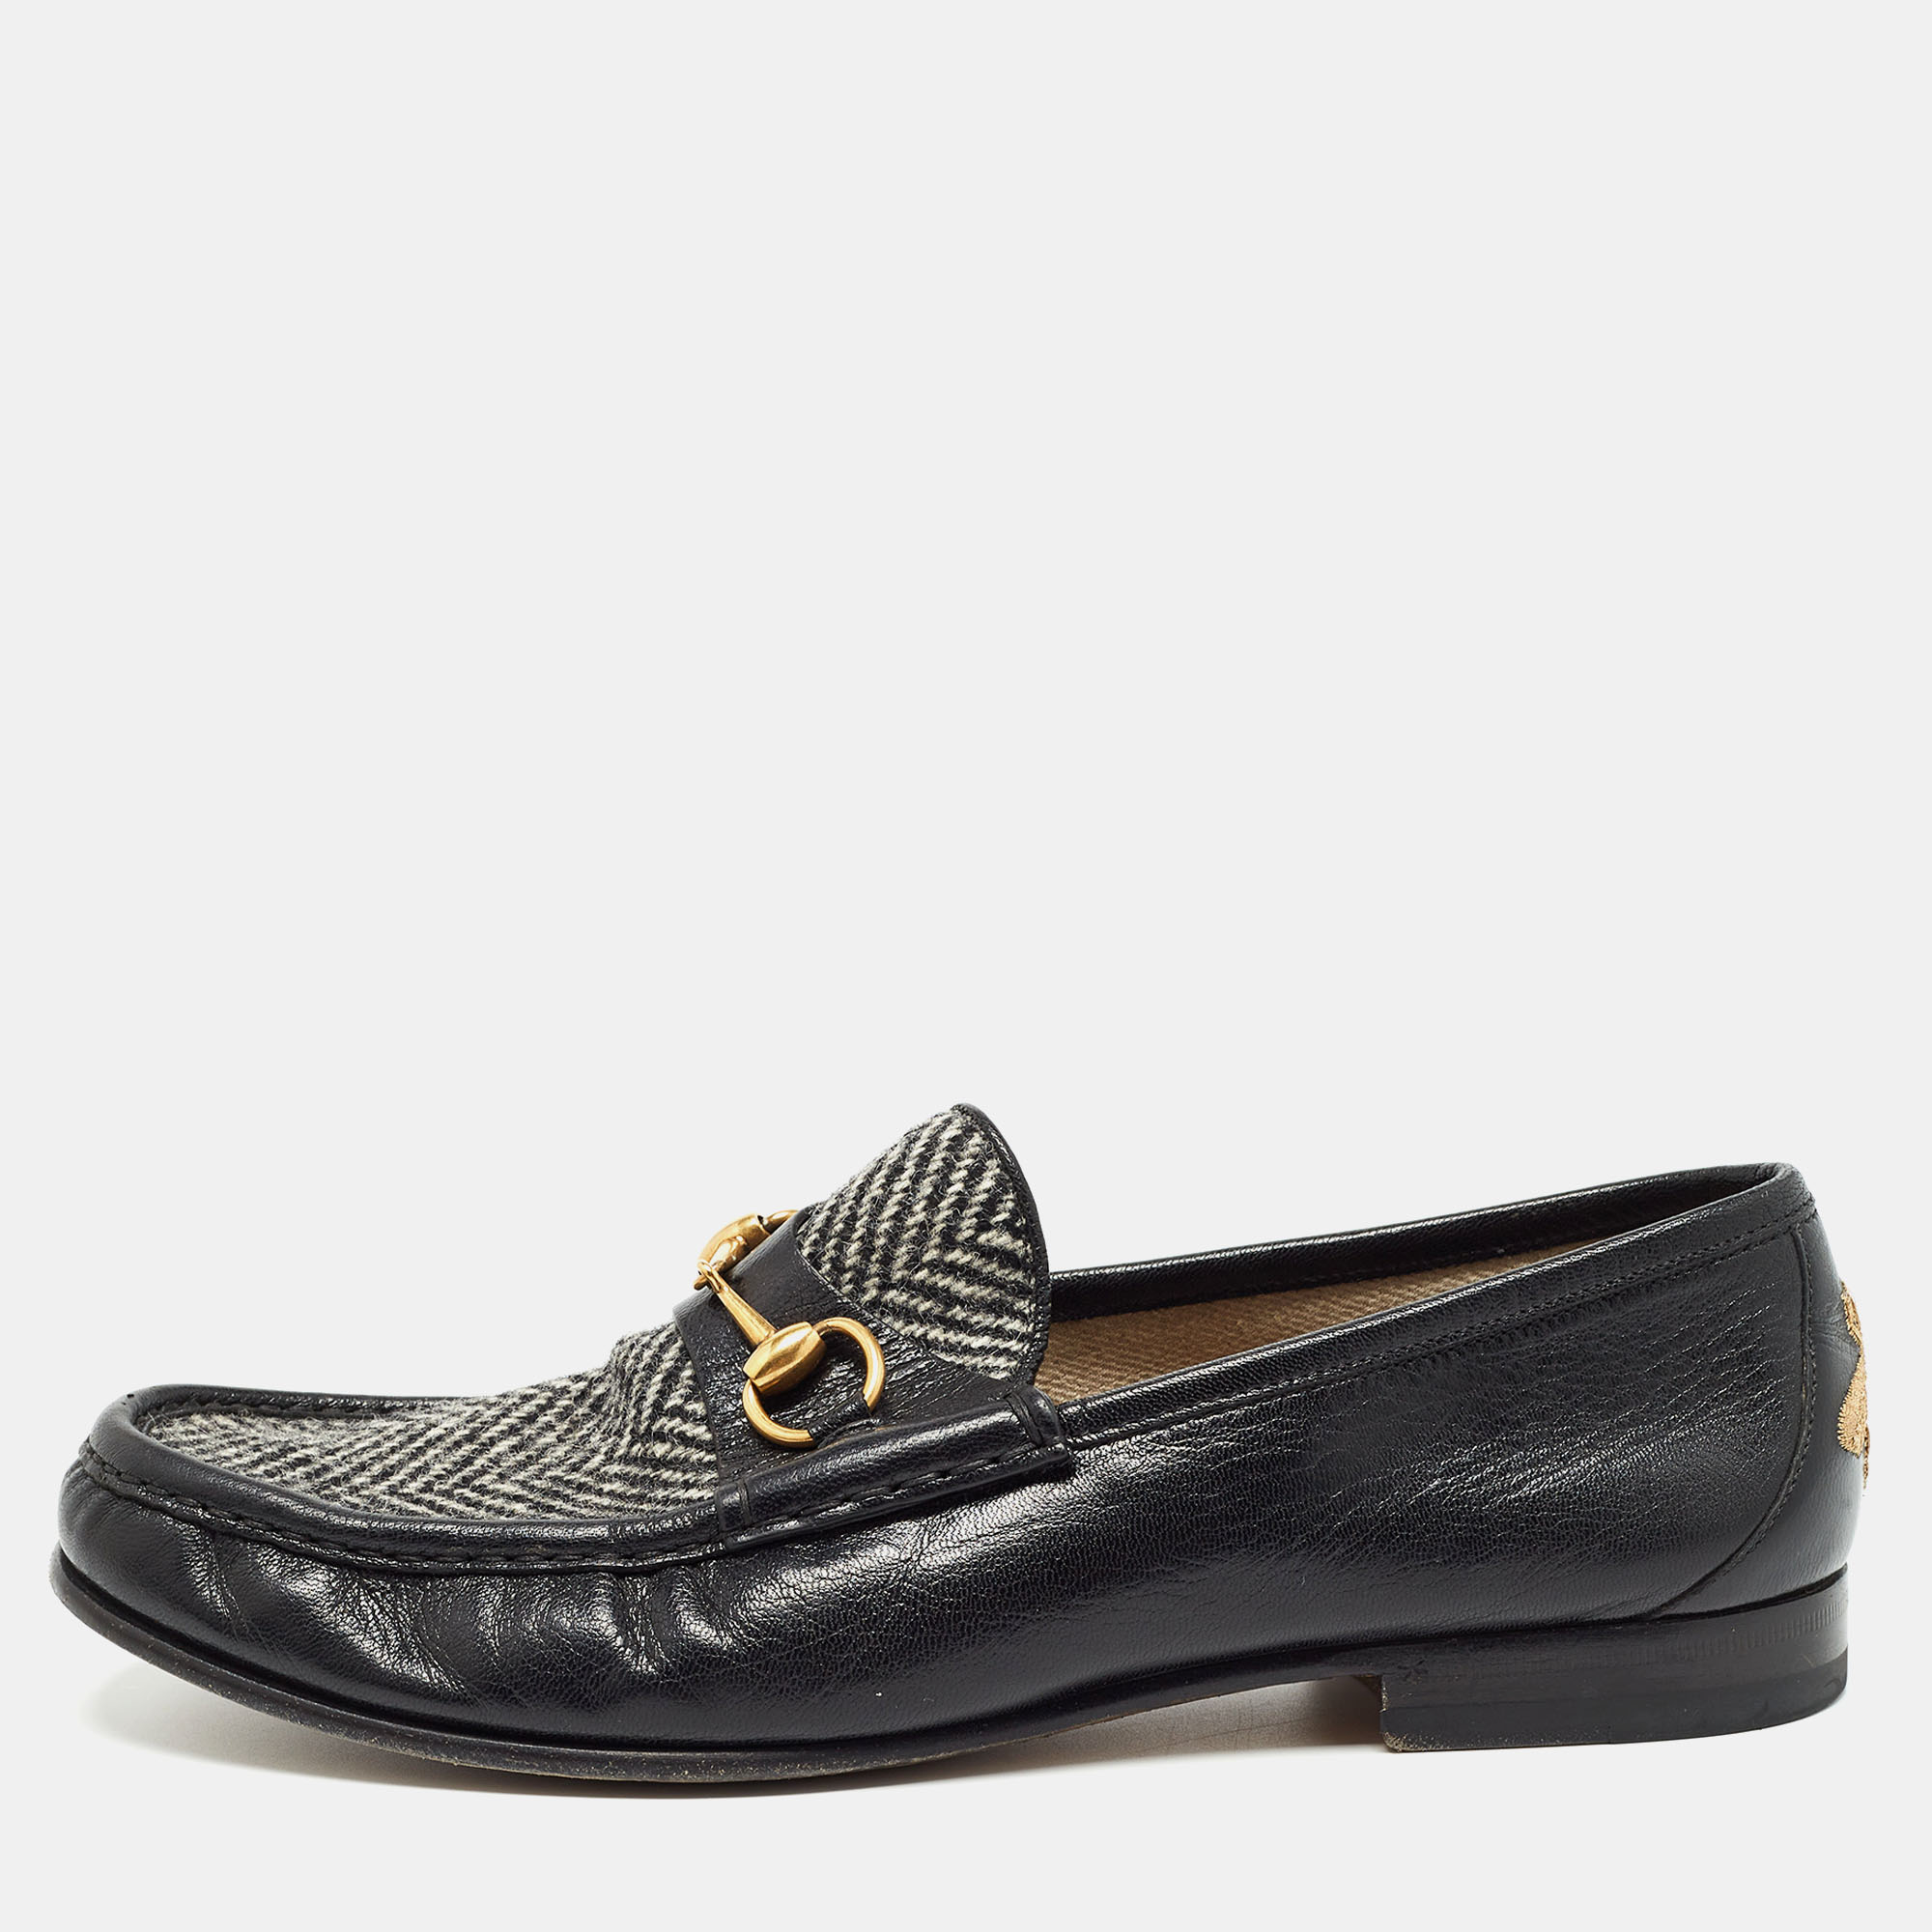 Gucci black leather and wool embroidered bee horsebit loafers size 44